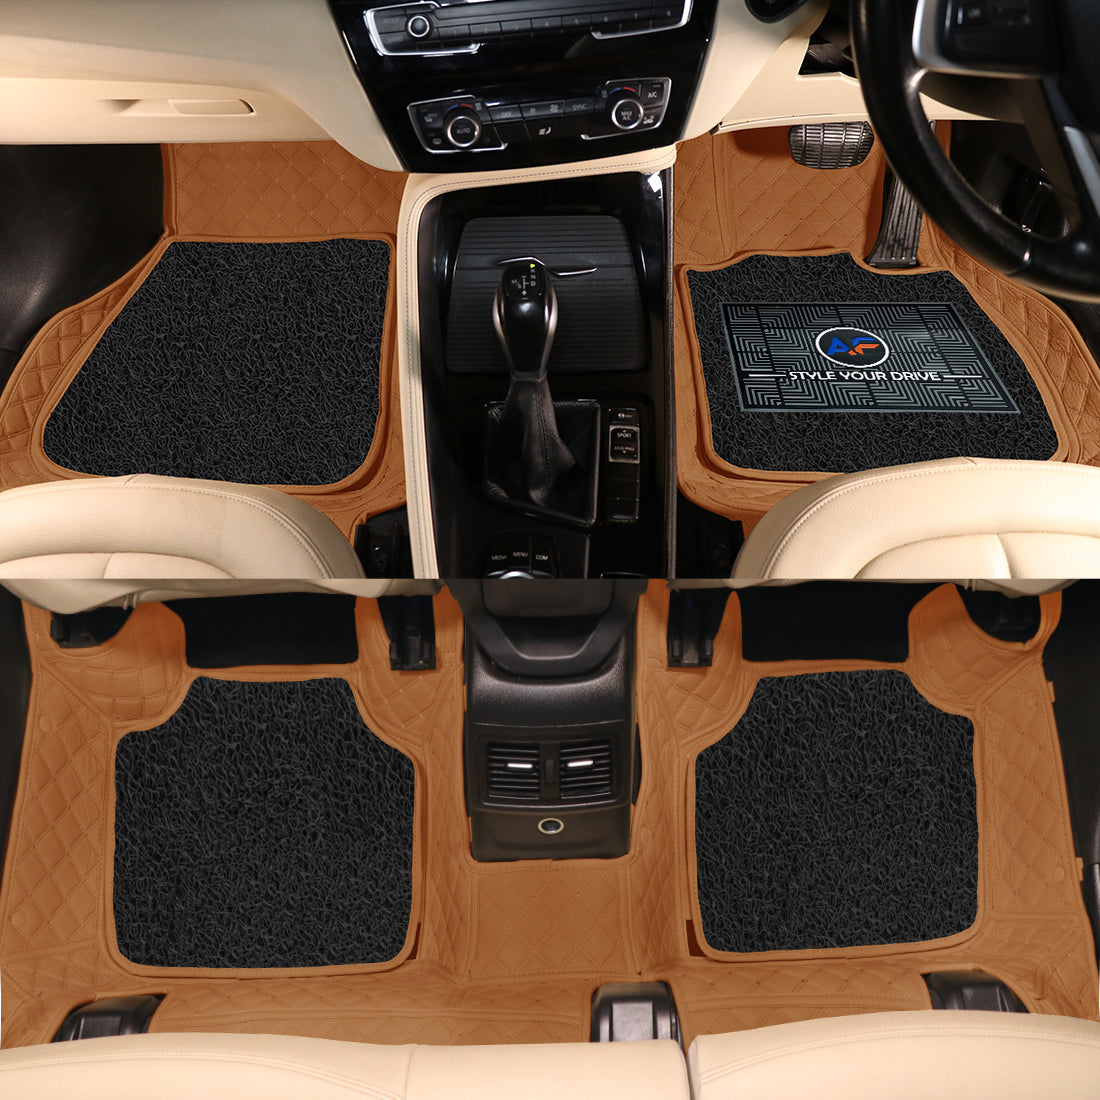 BMW X3 2018 7D Luxury Car Mat, All Weather Proof, Anti-Skid, 100% Waterproof & Odorless with Unique Diamond Fish Design (24mm Luxury PU Leather, 2 Rows)